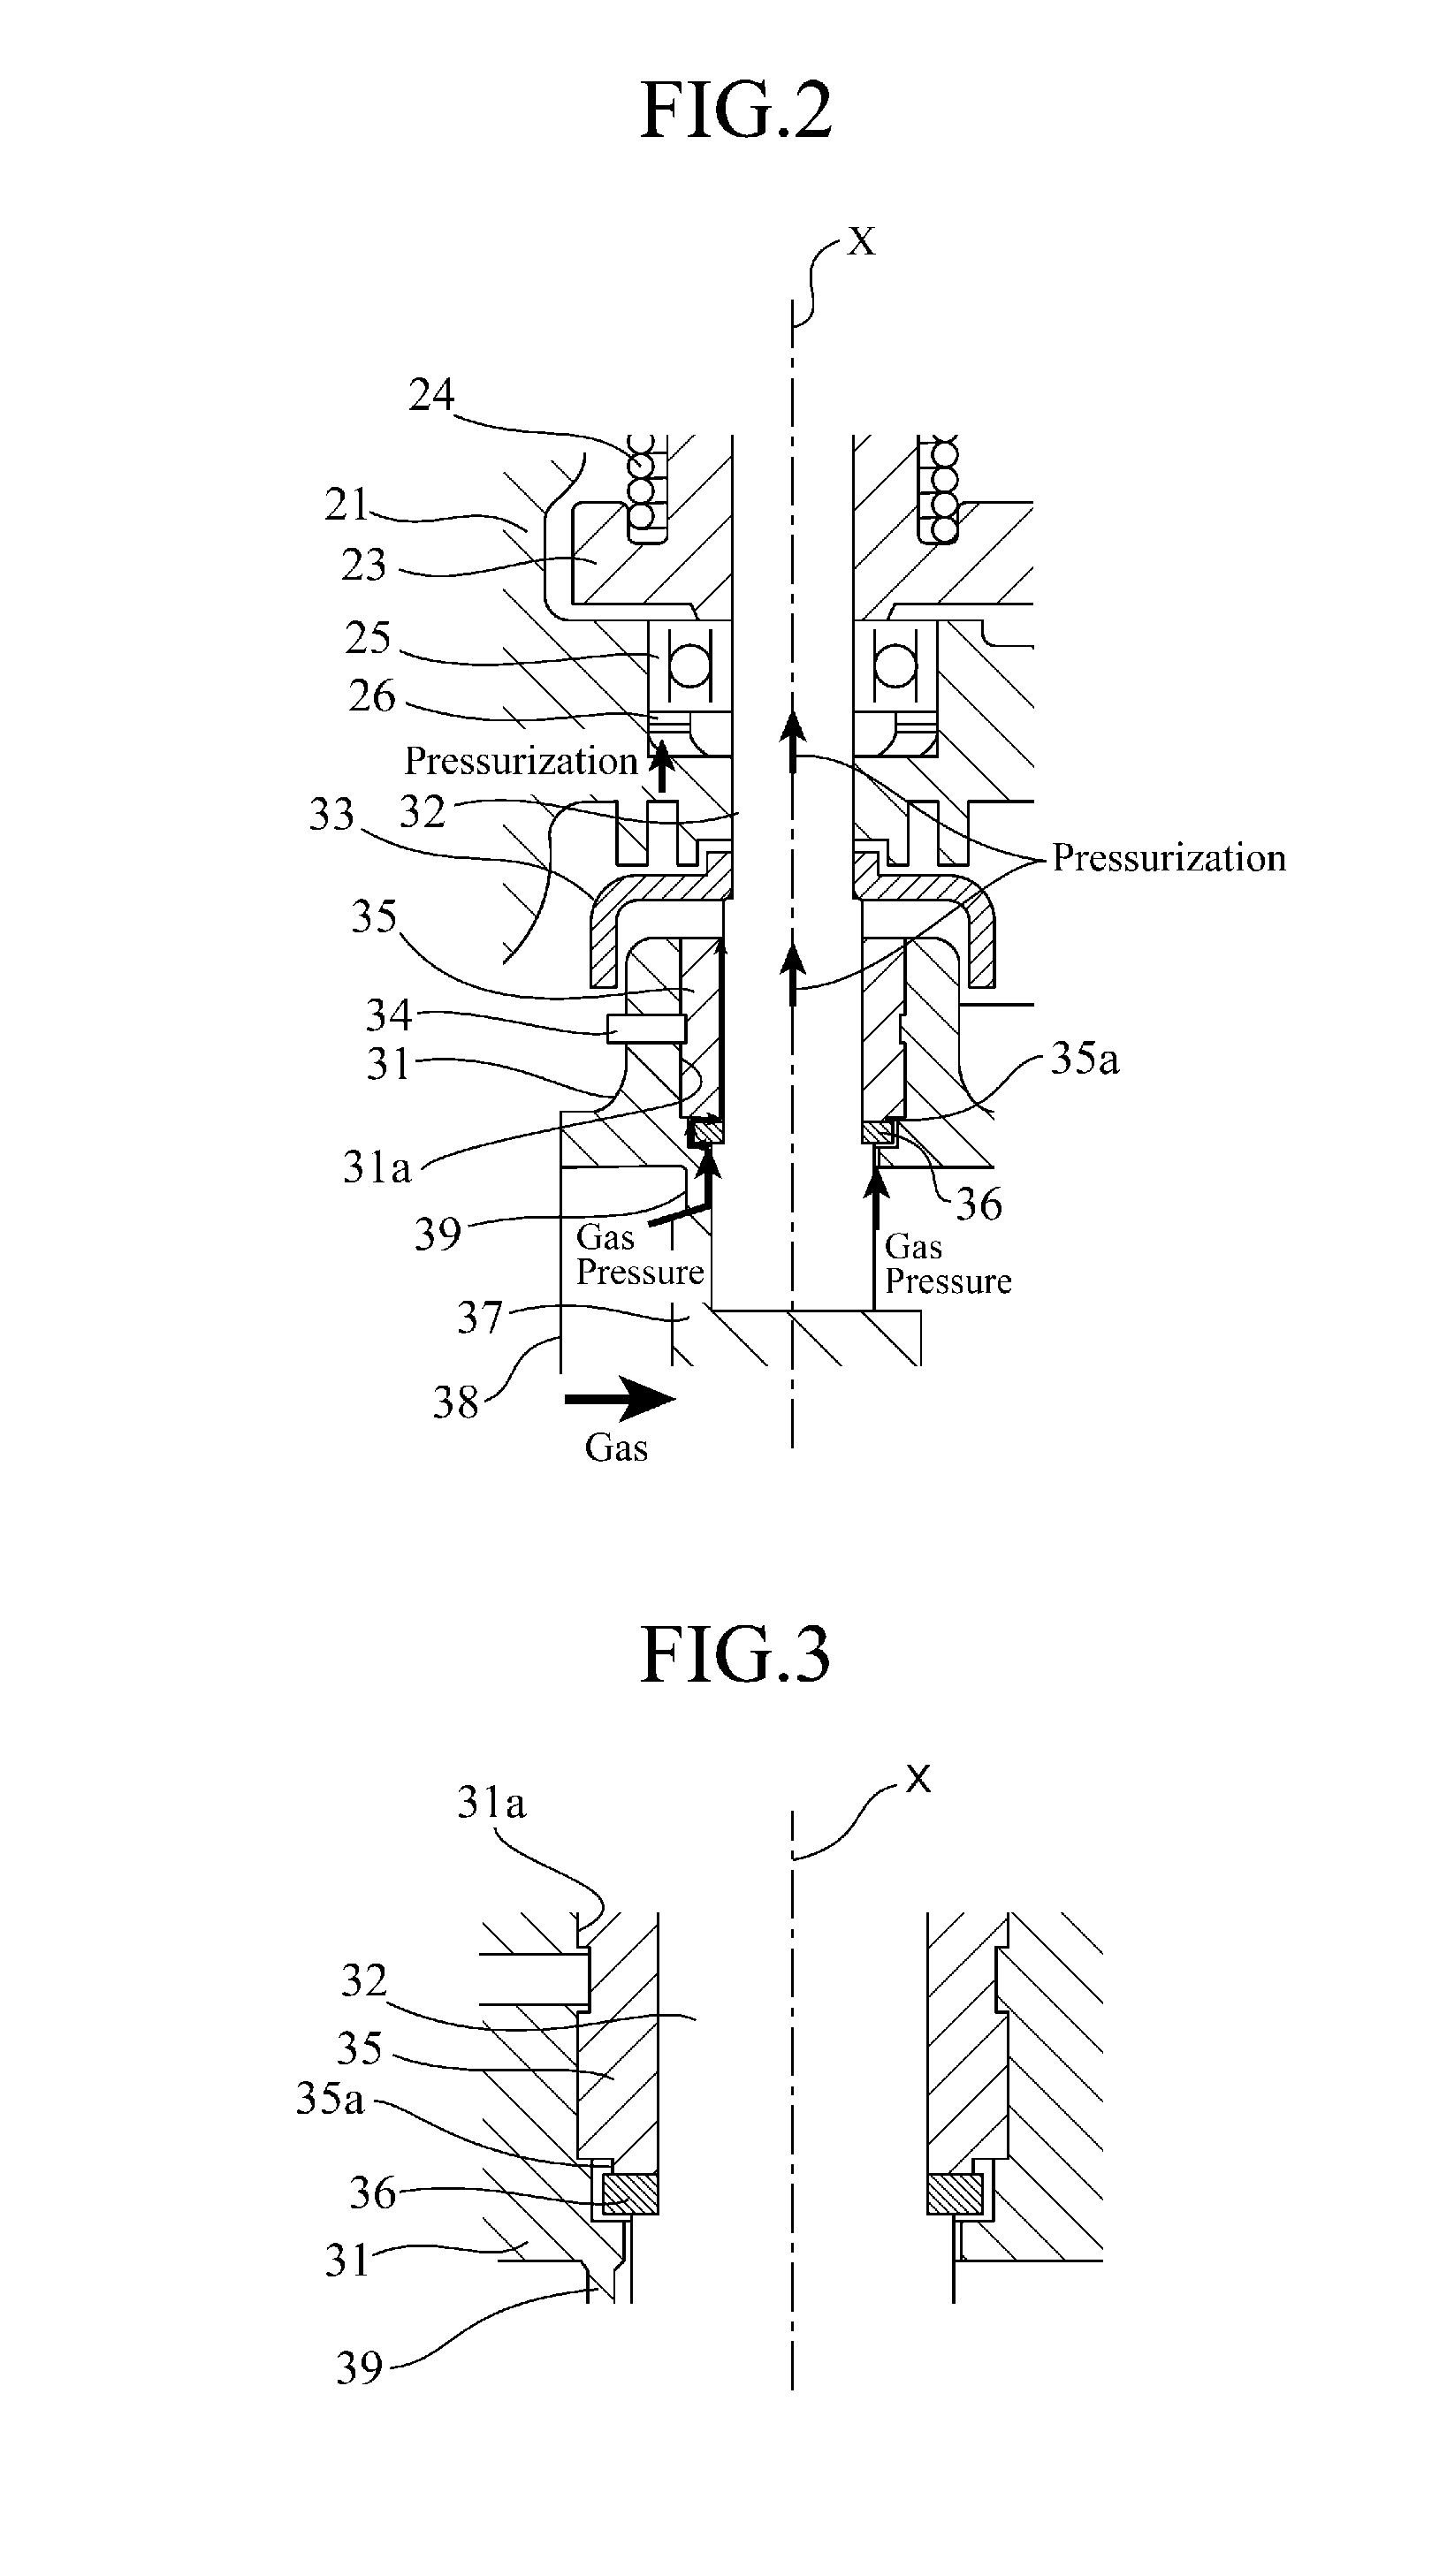 Structure for reducing axial leakage of valve